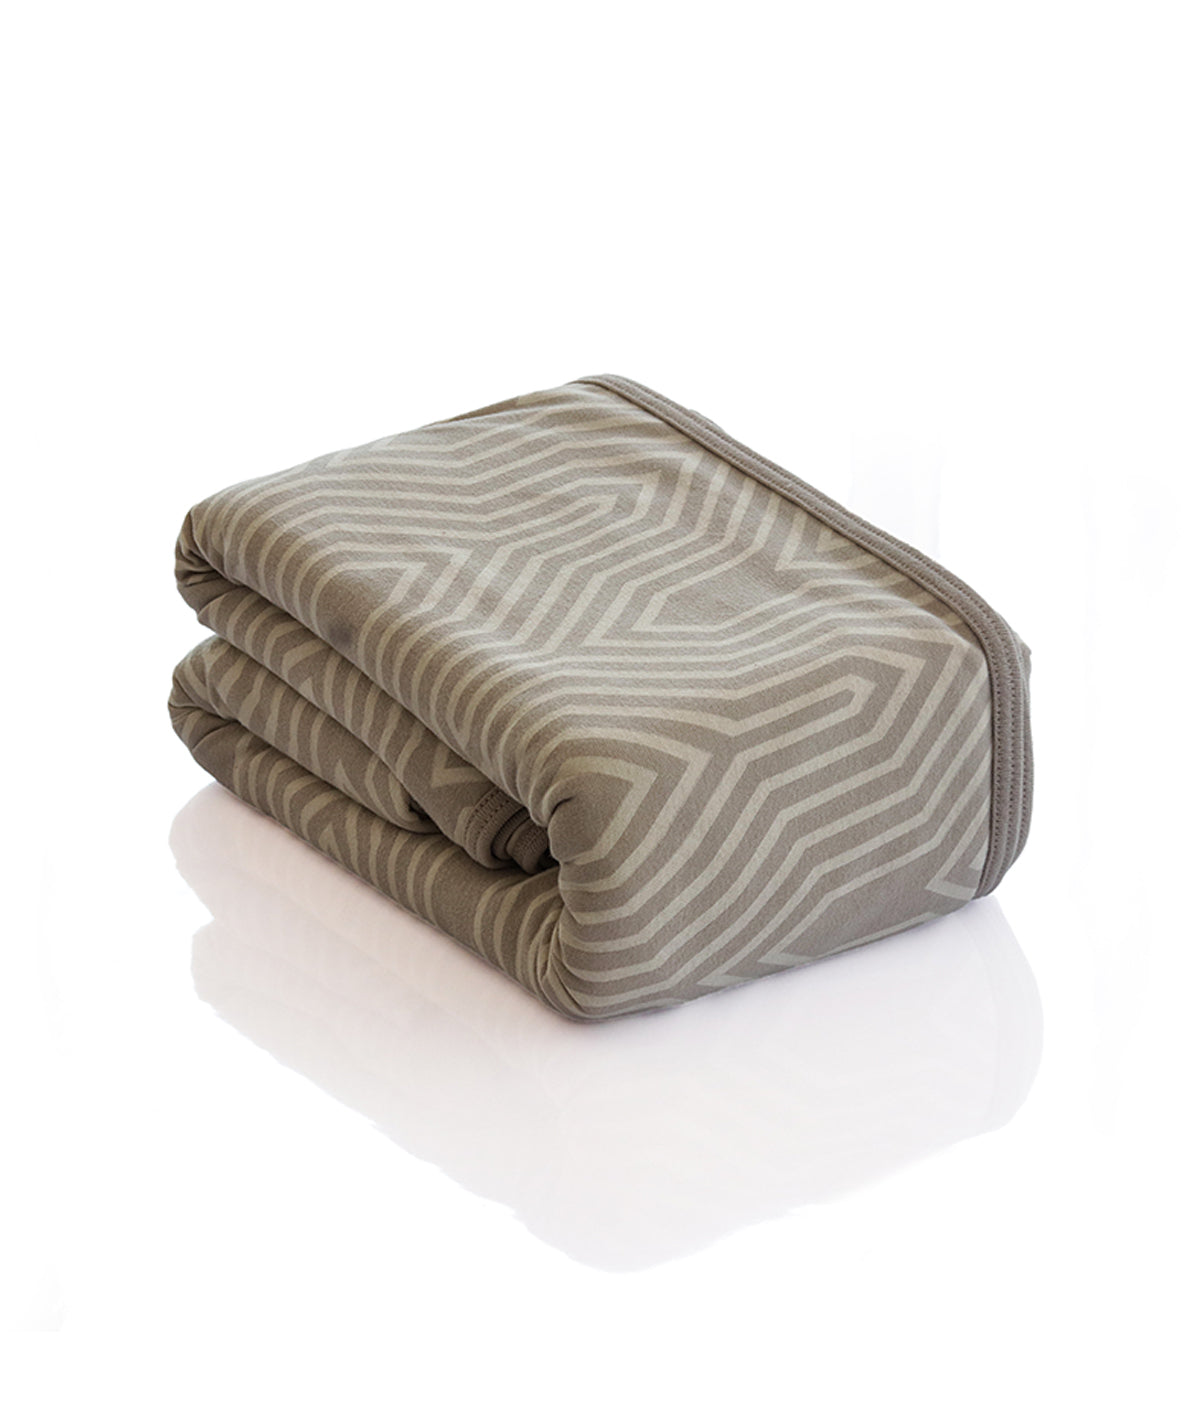 Graham Cotton Knitted Double Bed AC Blanket / Dohar For Round The Year Use (Pale Wisheper & Natural)